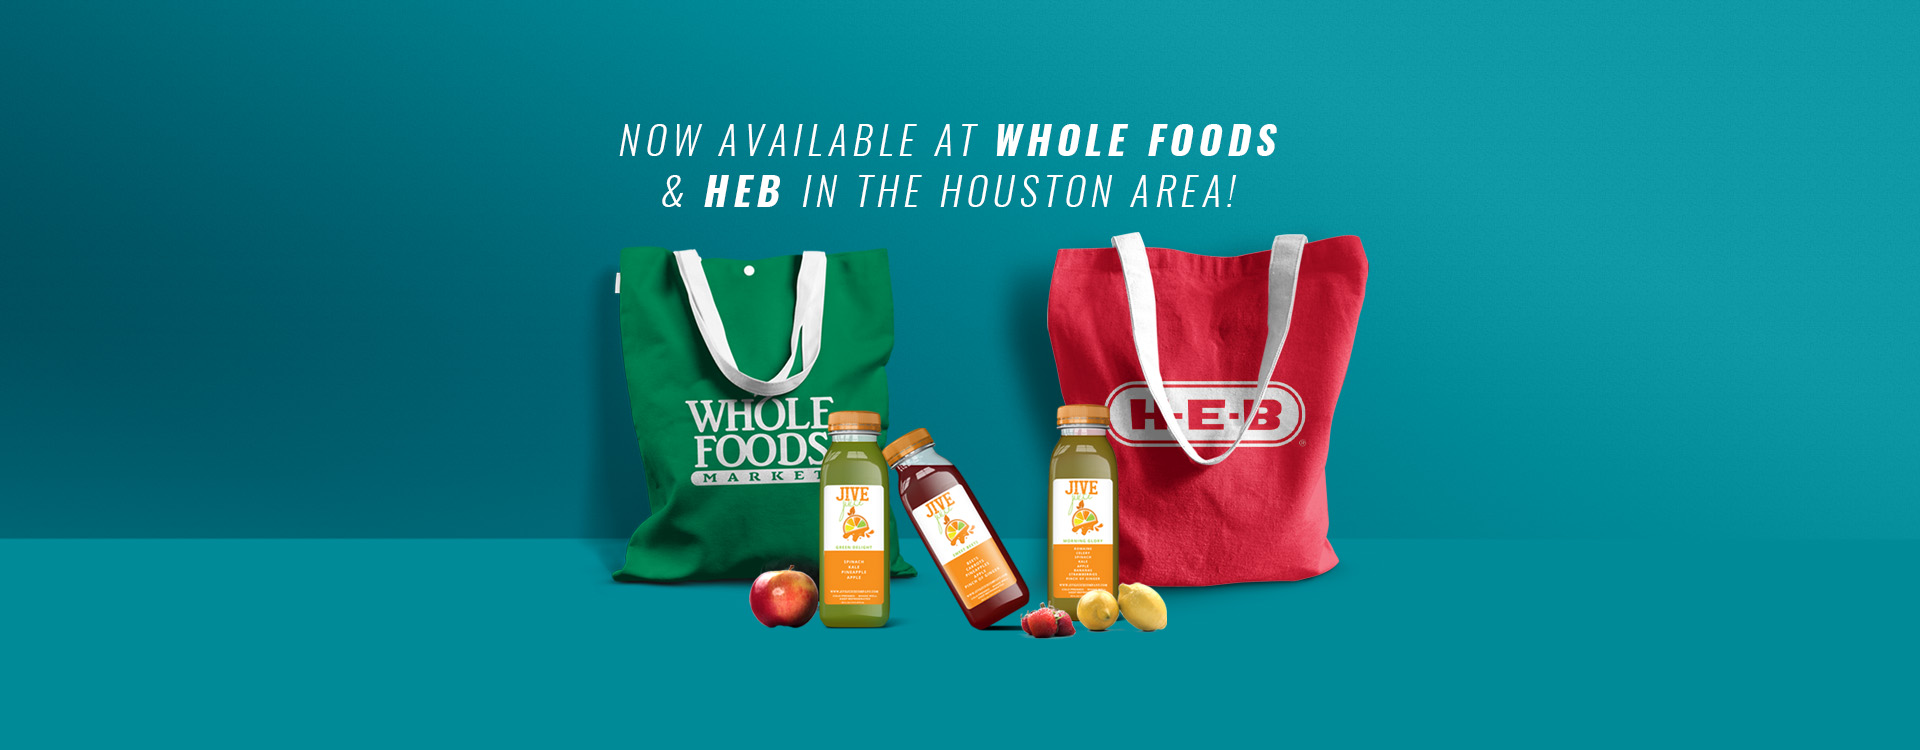 Now Available At Houston Area Whole Foods & HEB